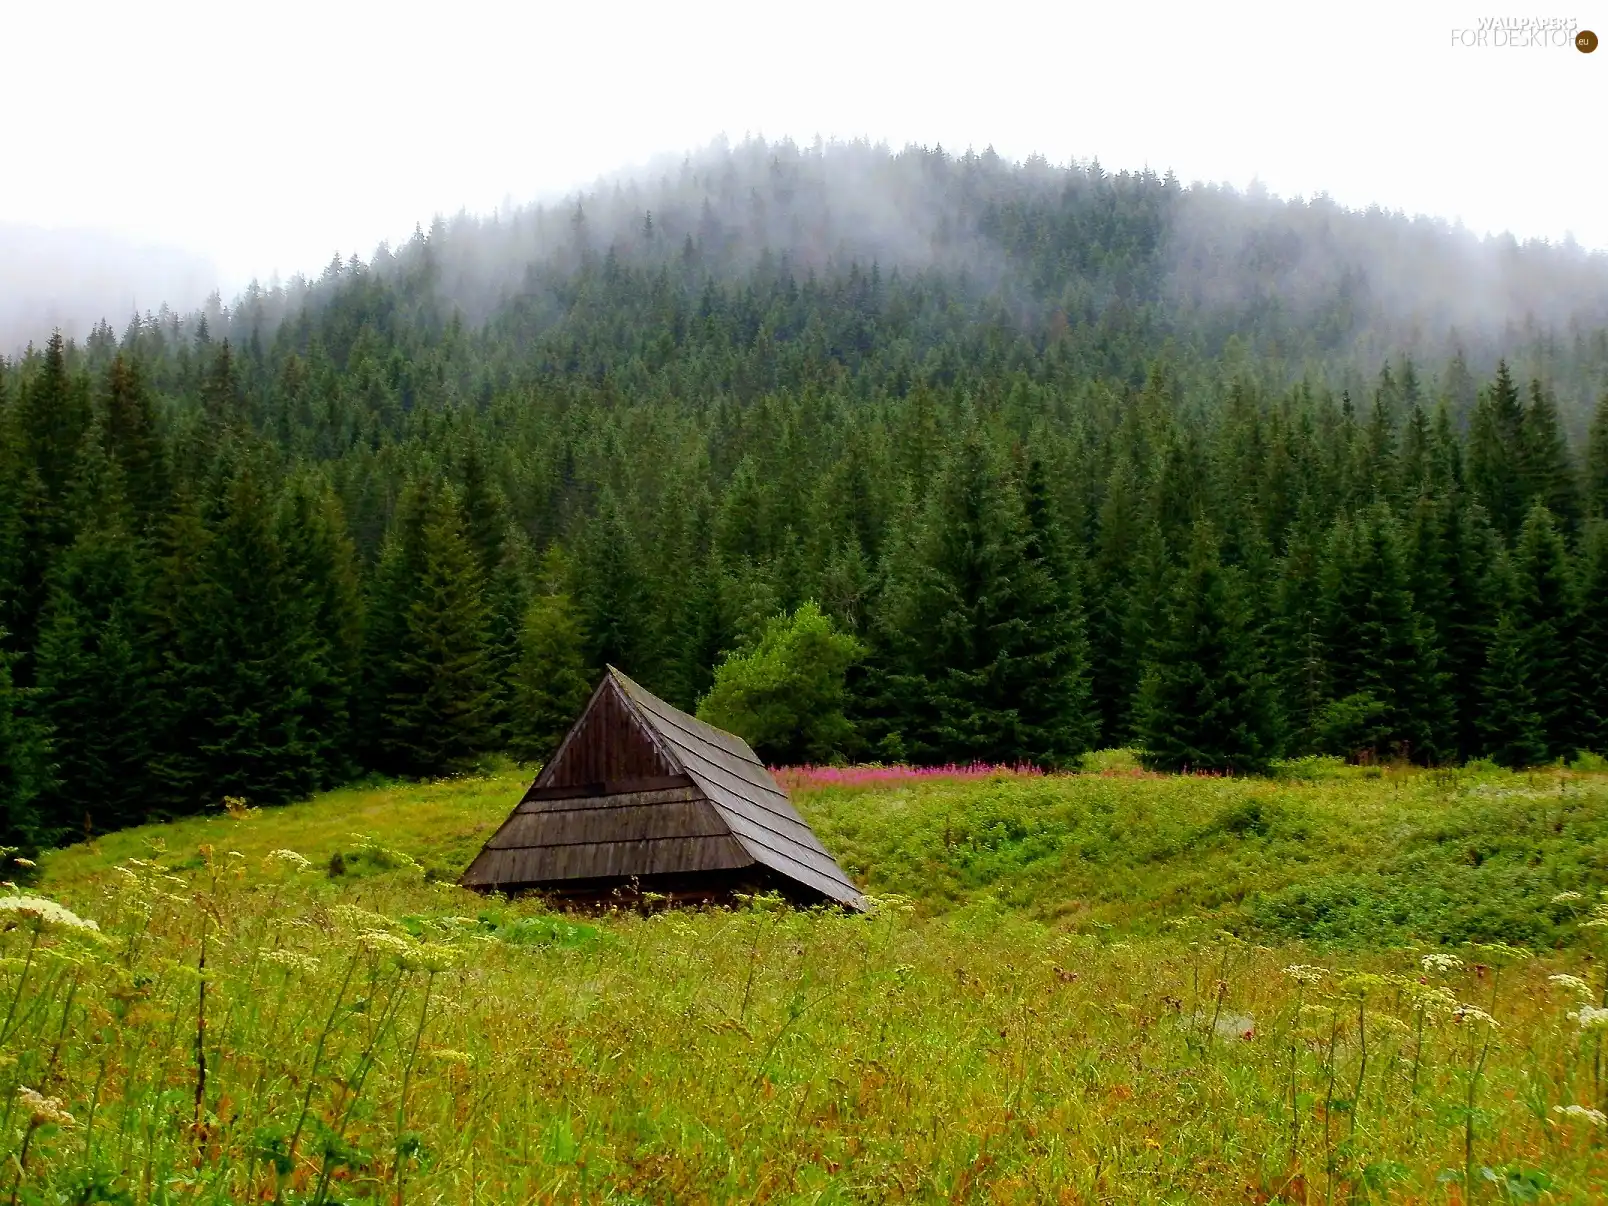 Mountains, nature, car in the meadow, hut, Tatras, landscape